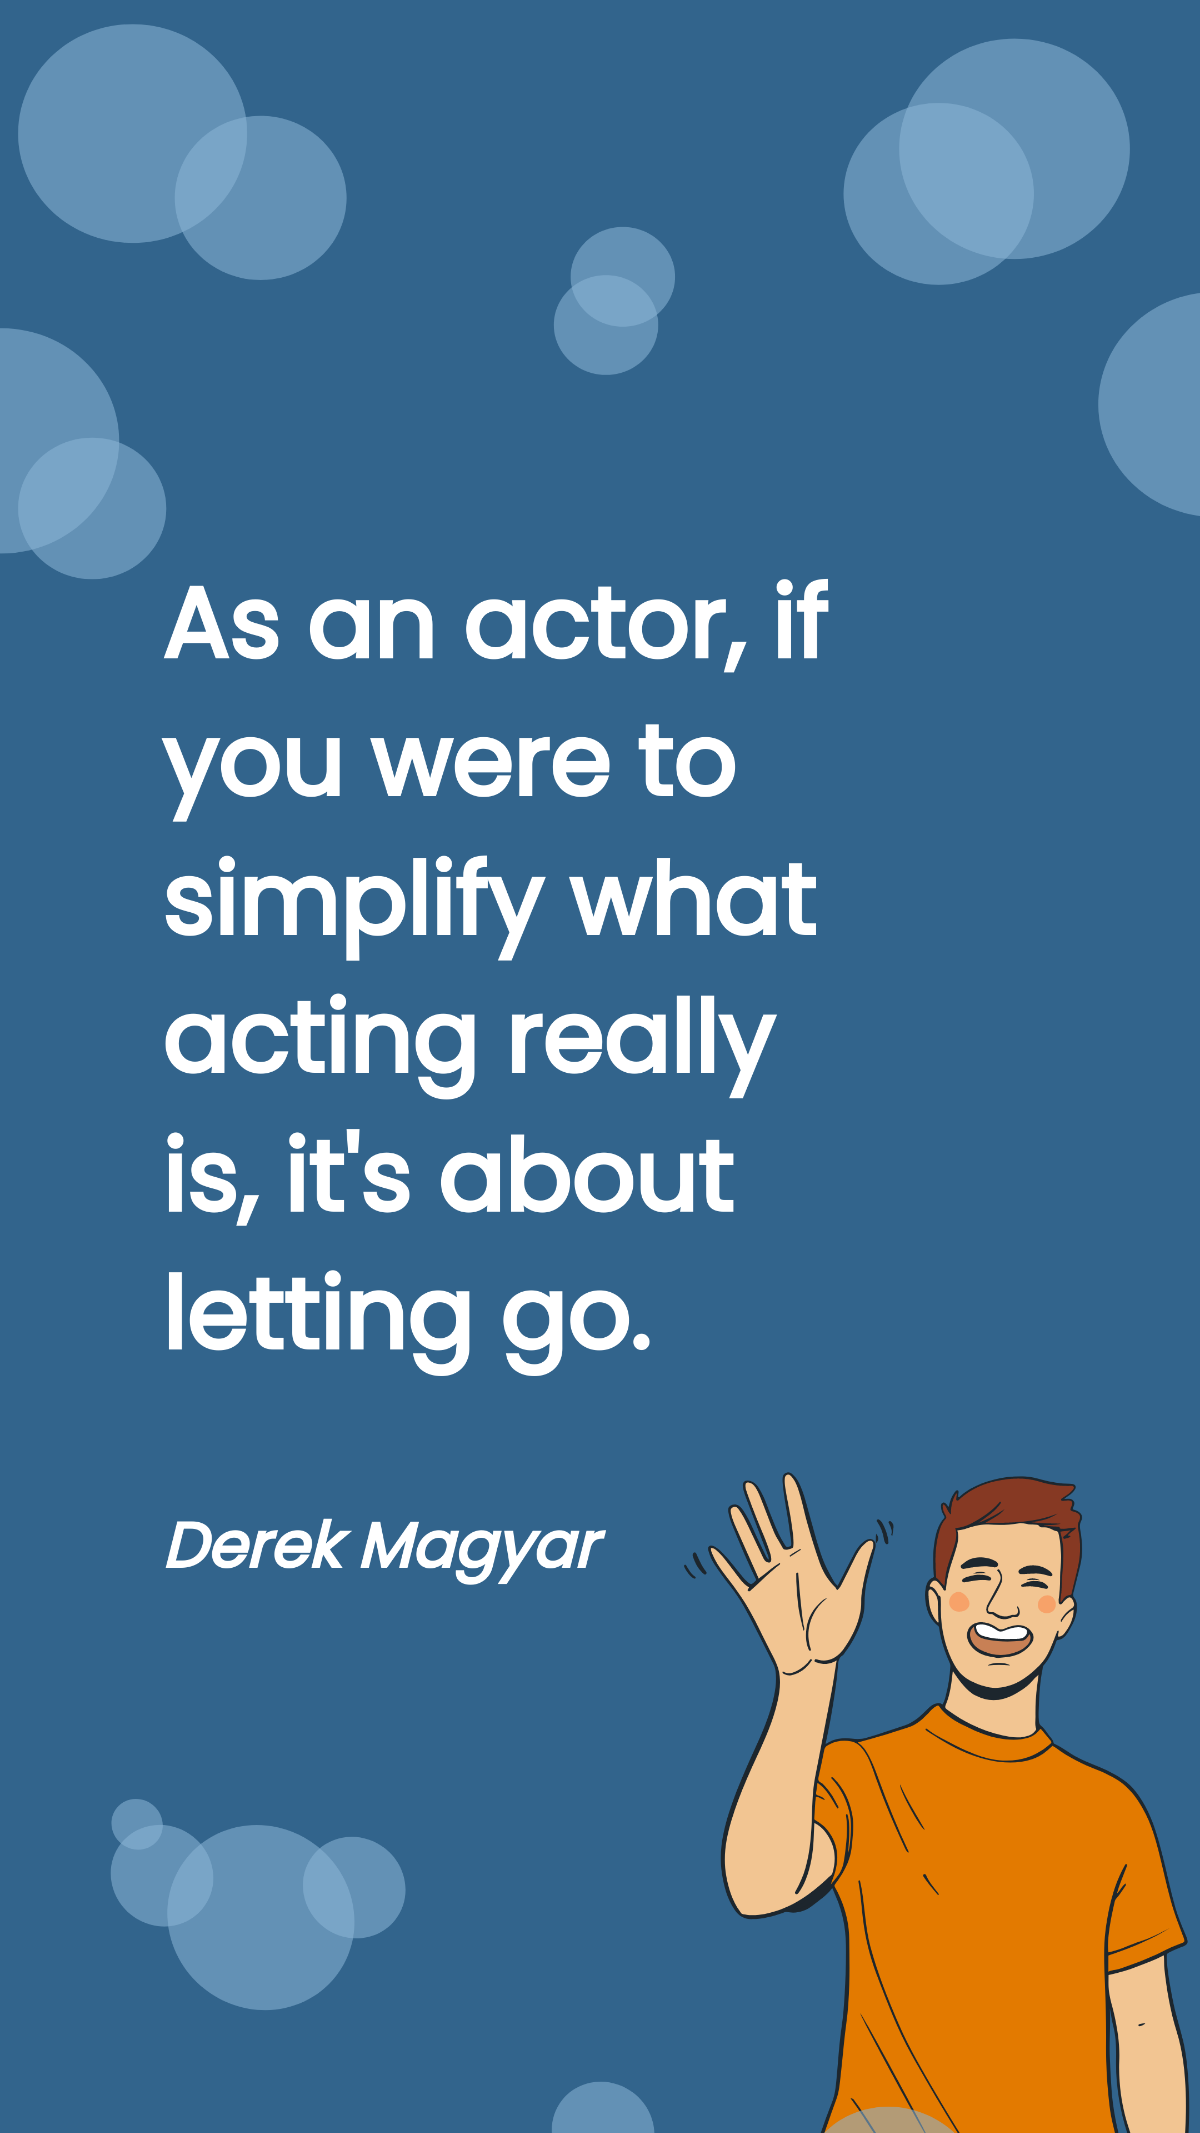 Free Derek Magyar - As an actor, if you were to simplify what acting really is, it's about letting go. Template